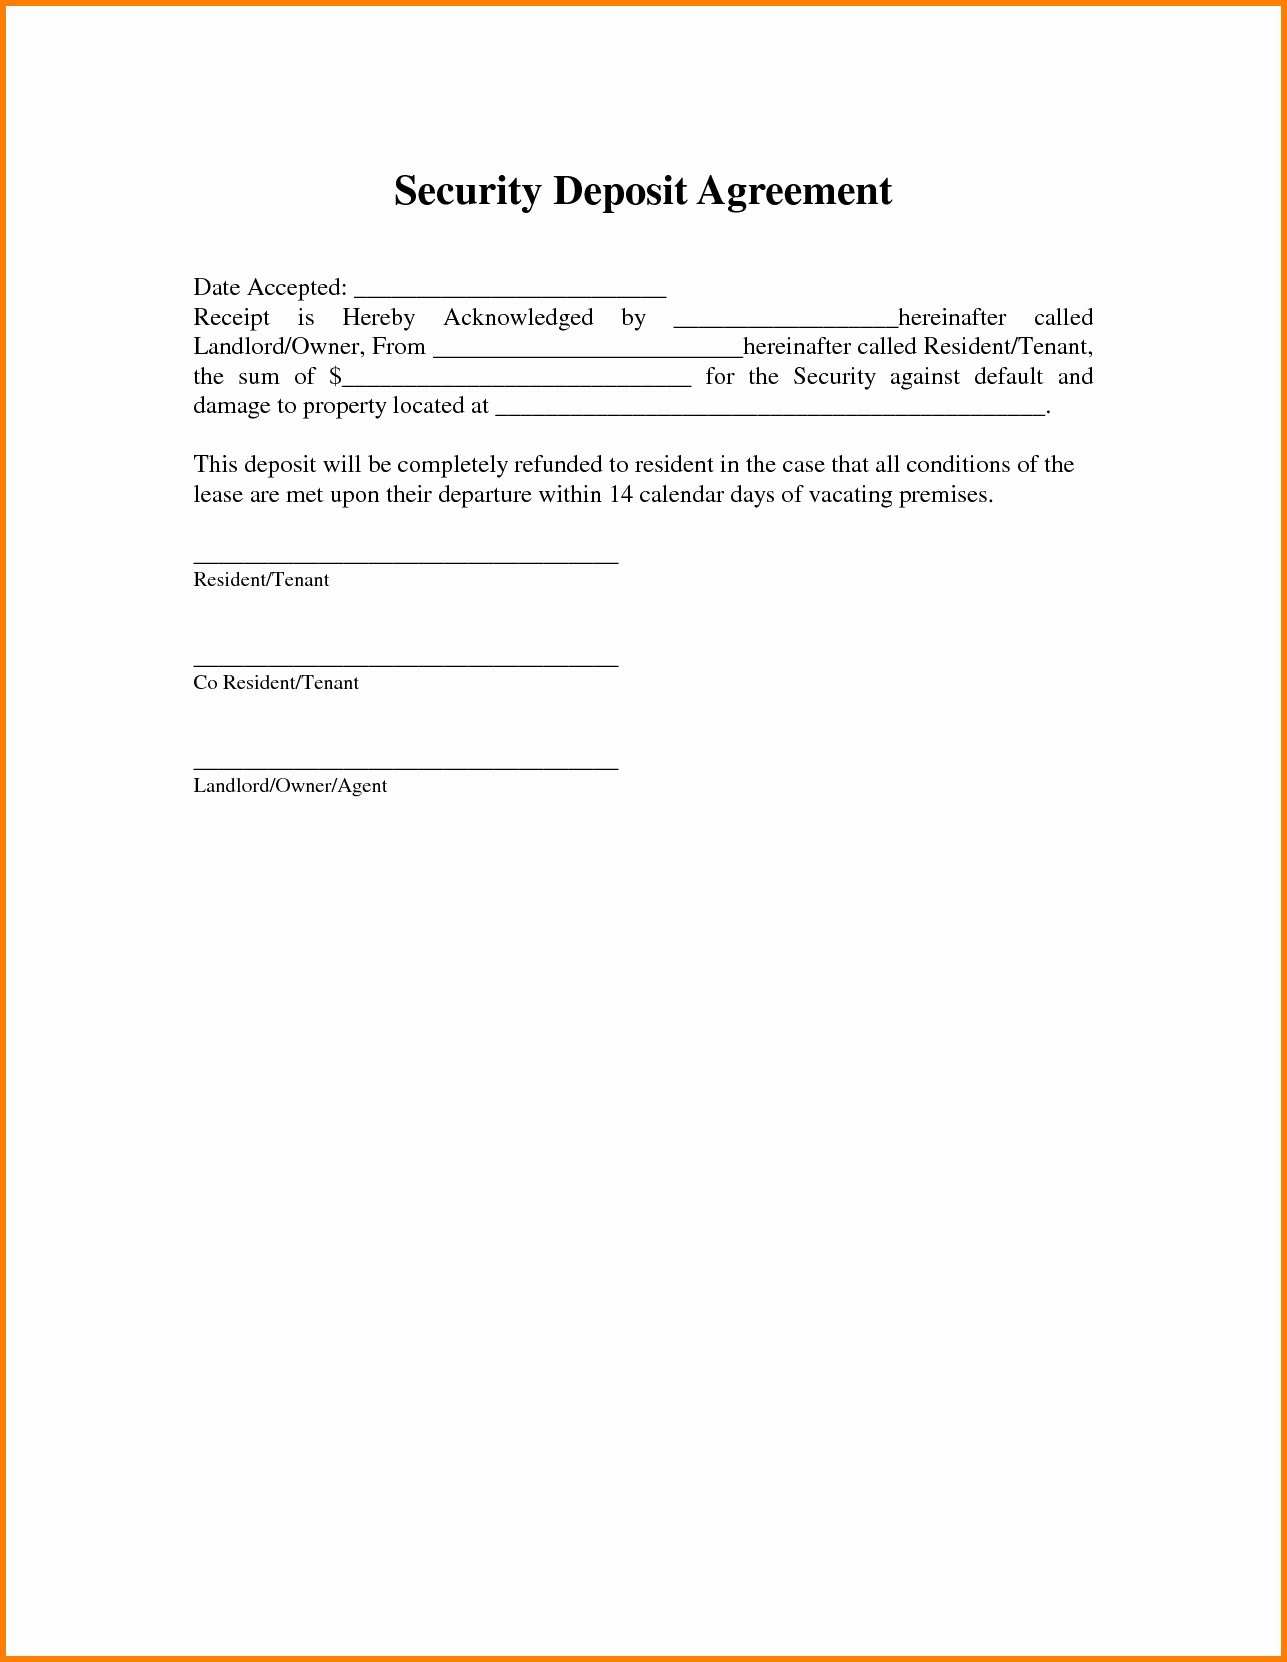 Security Deposit Letter format Lovely Deposit Agreement Template Regular Down Payment Security